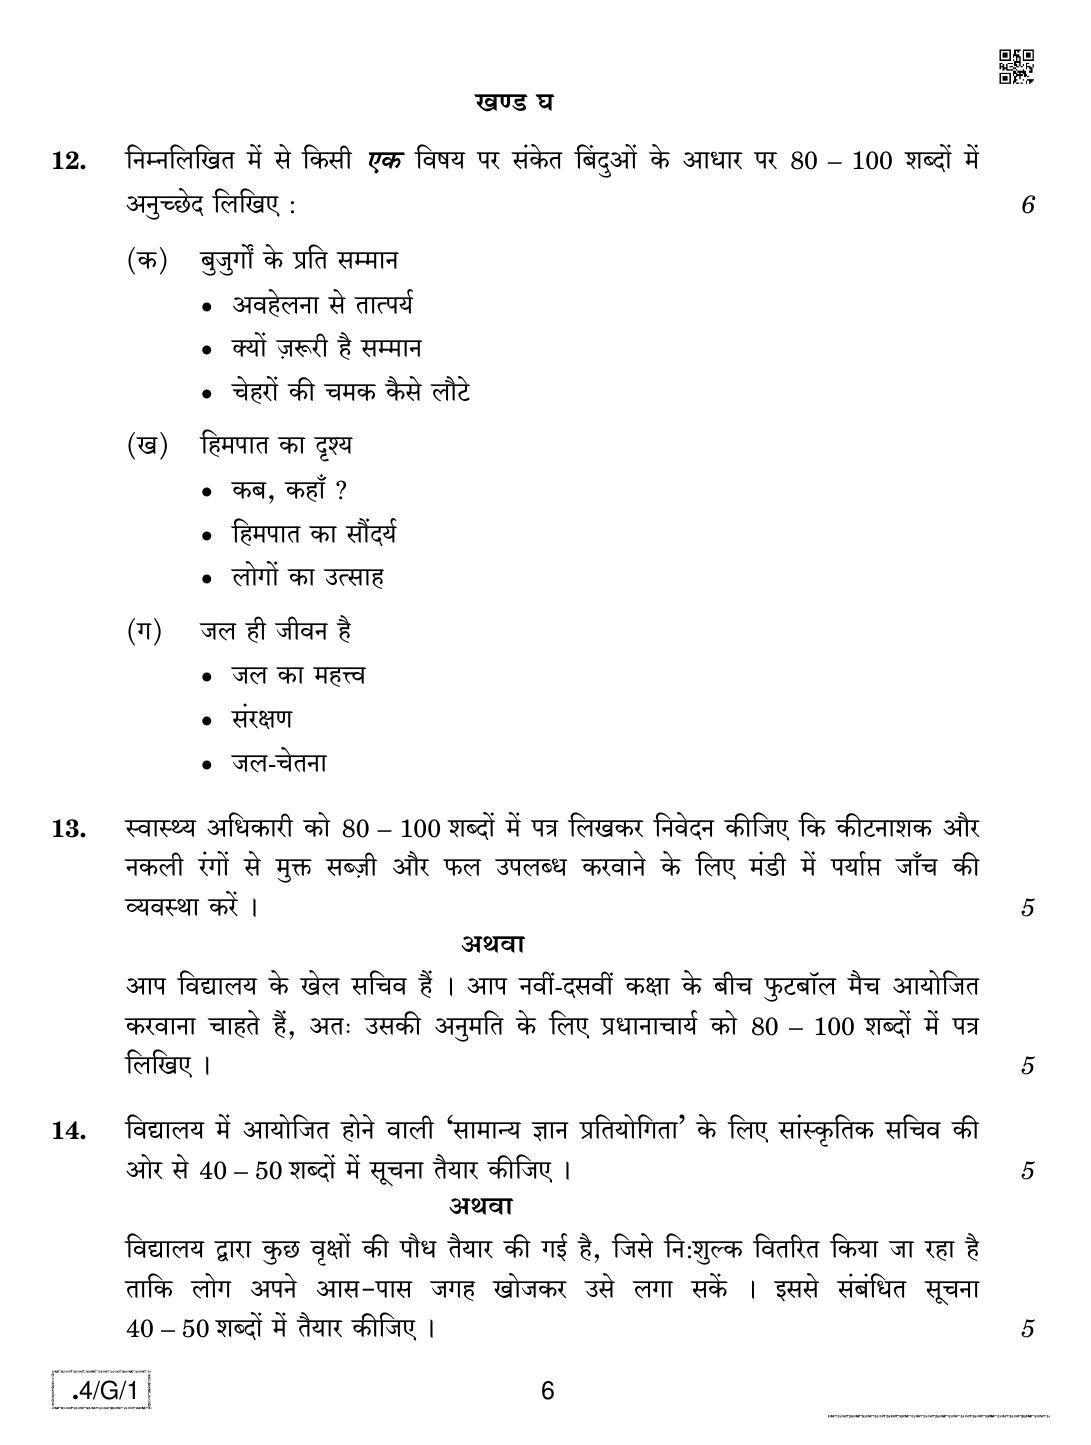 CBSE Class 10 4-C-1 Hindi B 2020 Compartment Question Paper - Page 6